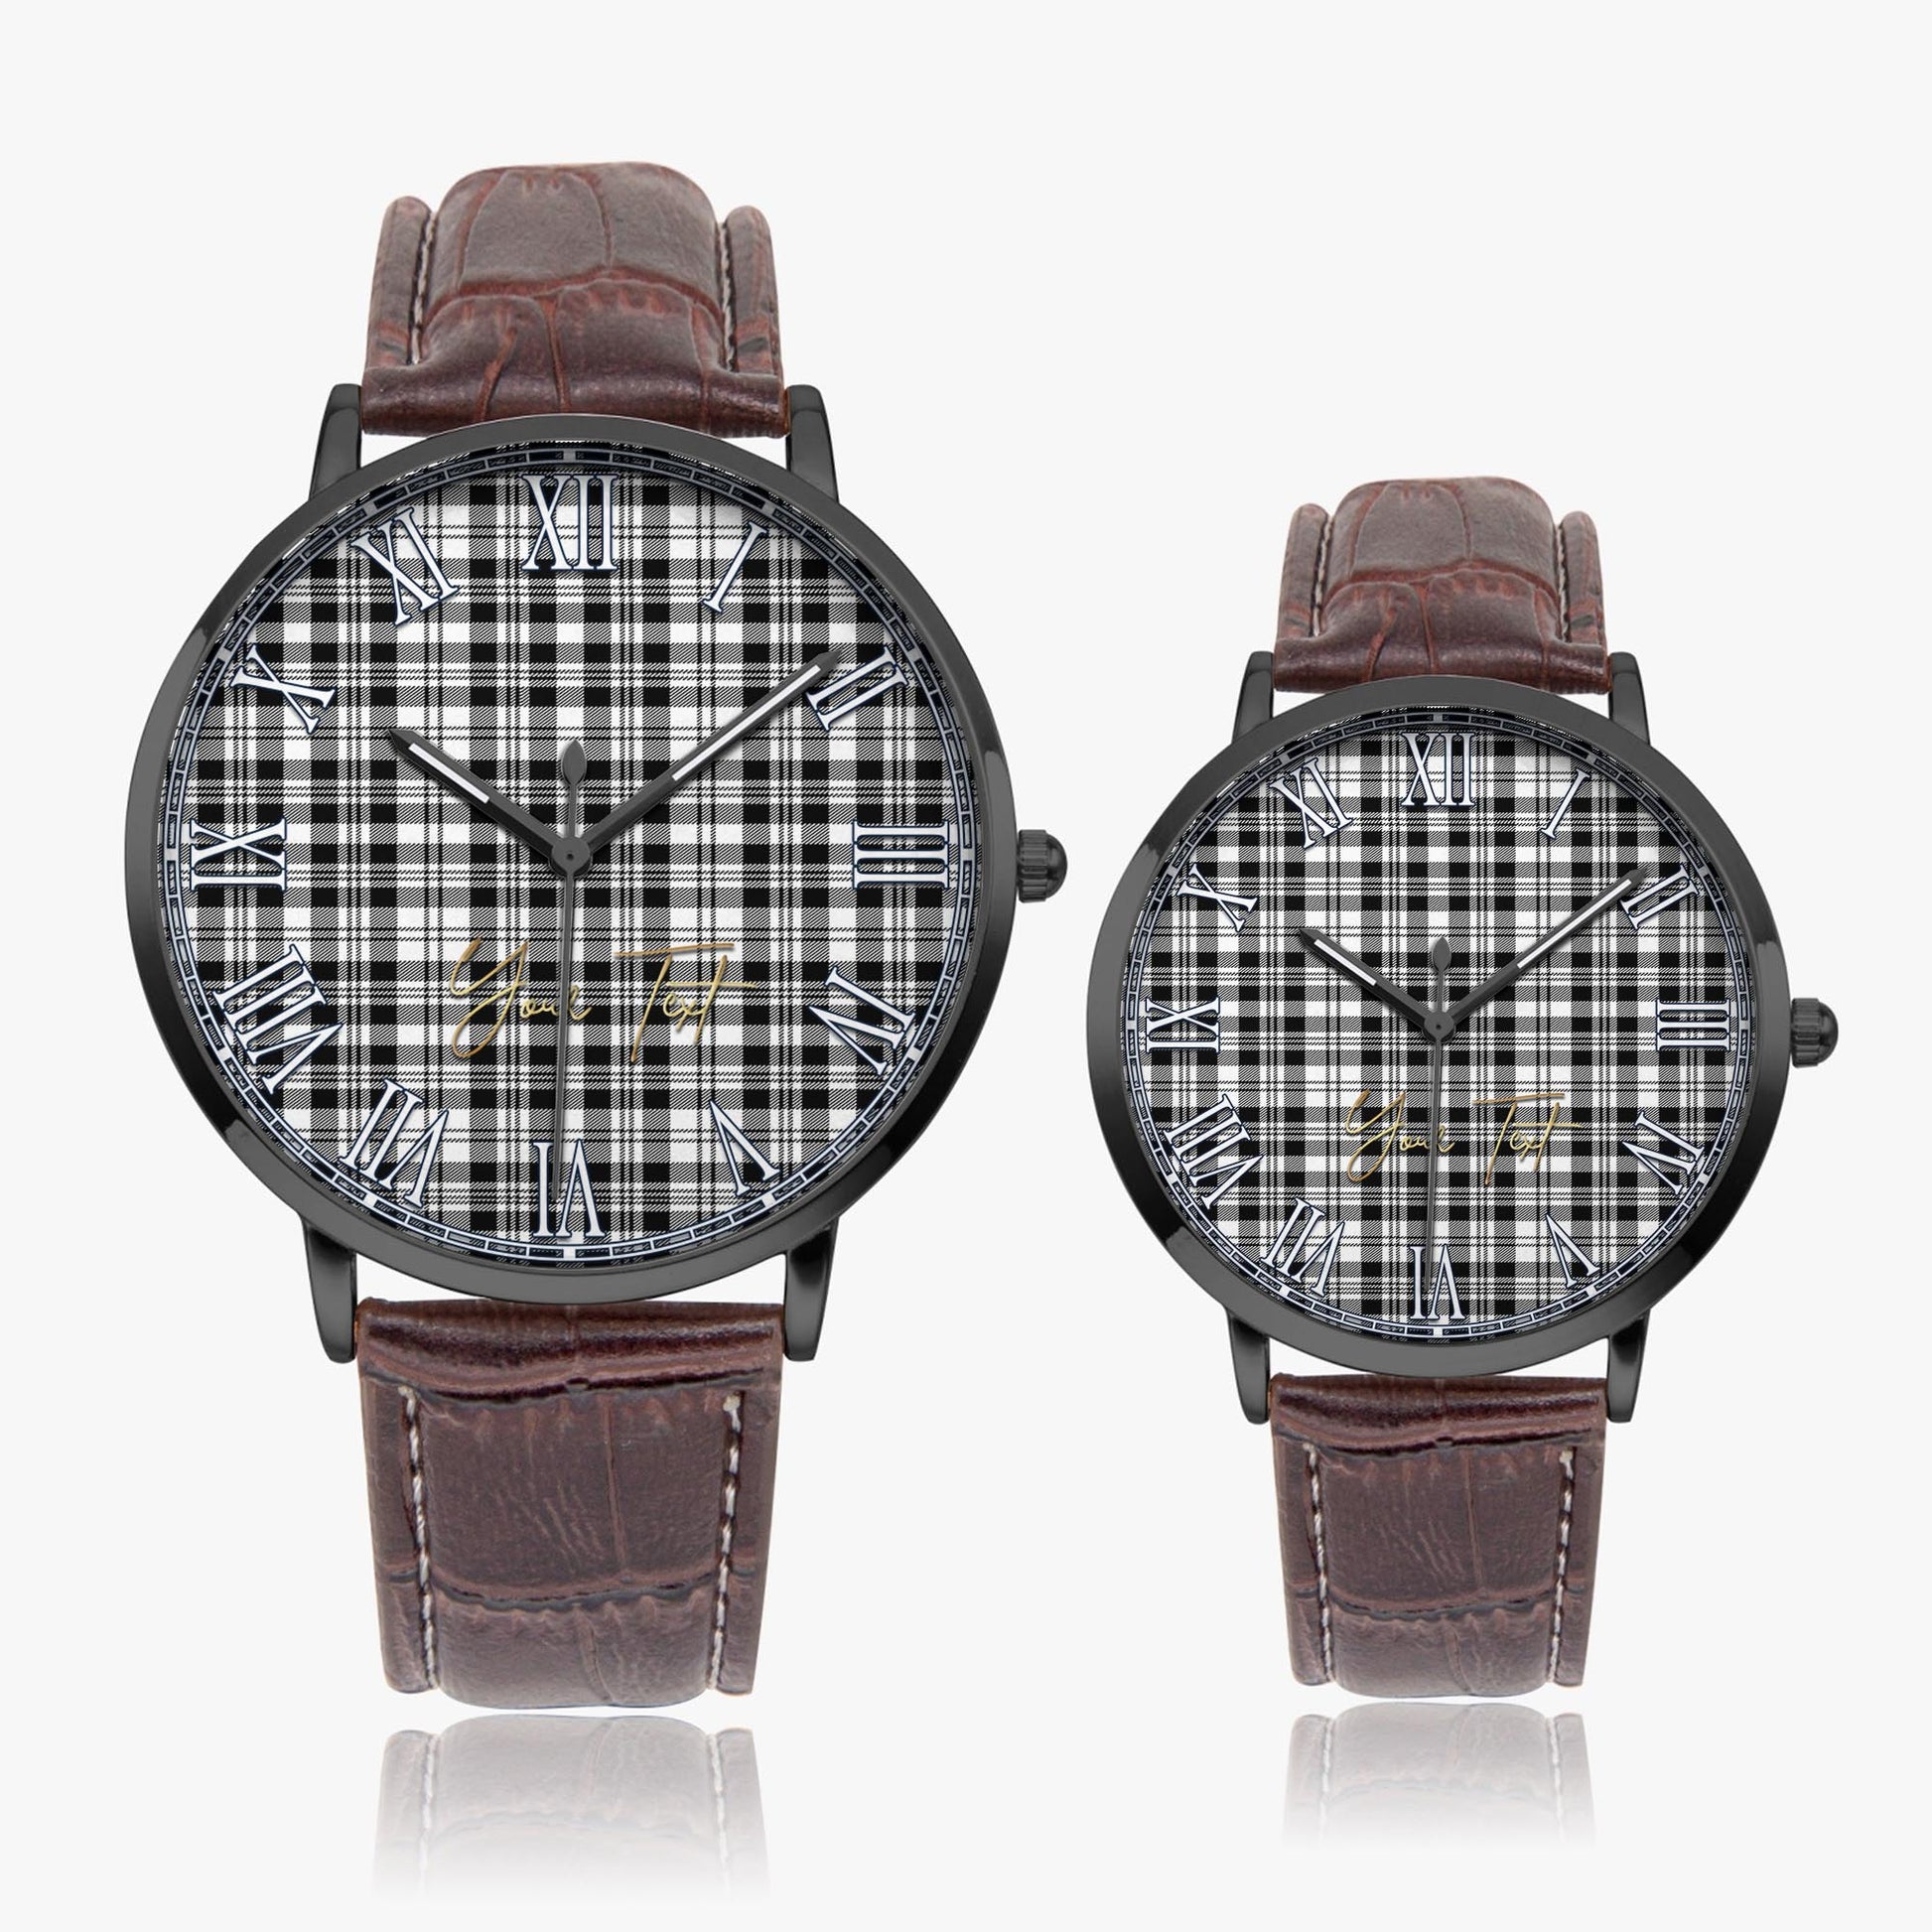 Scott Black White Tartan Personalized Your Text Leather Trap Quartz Watch Ultra Thin Black Case With Brown Leather Strap - Tartanvibesclothing